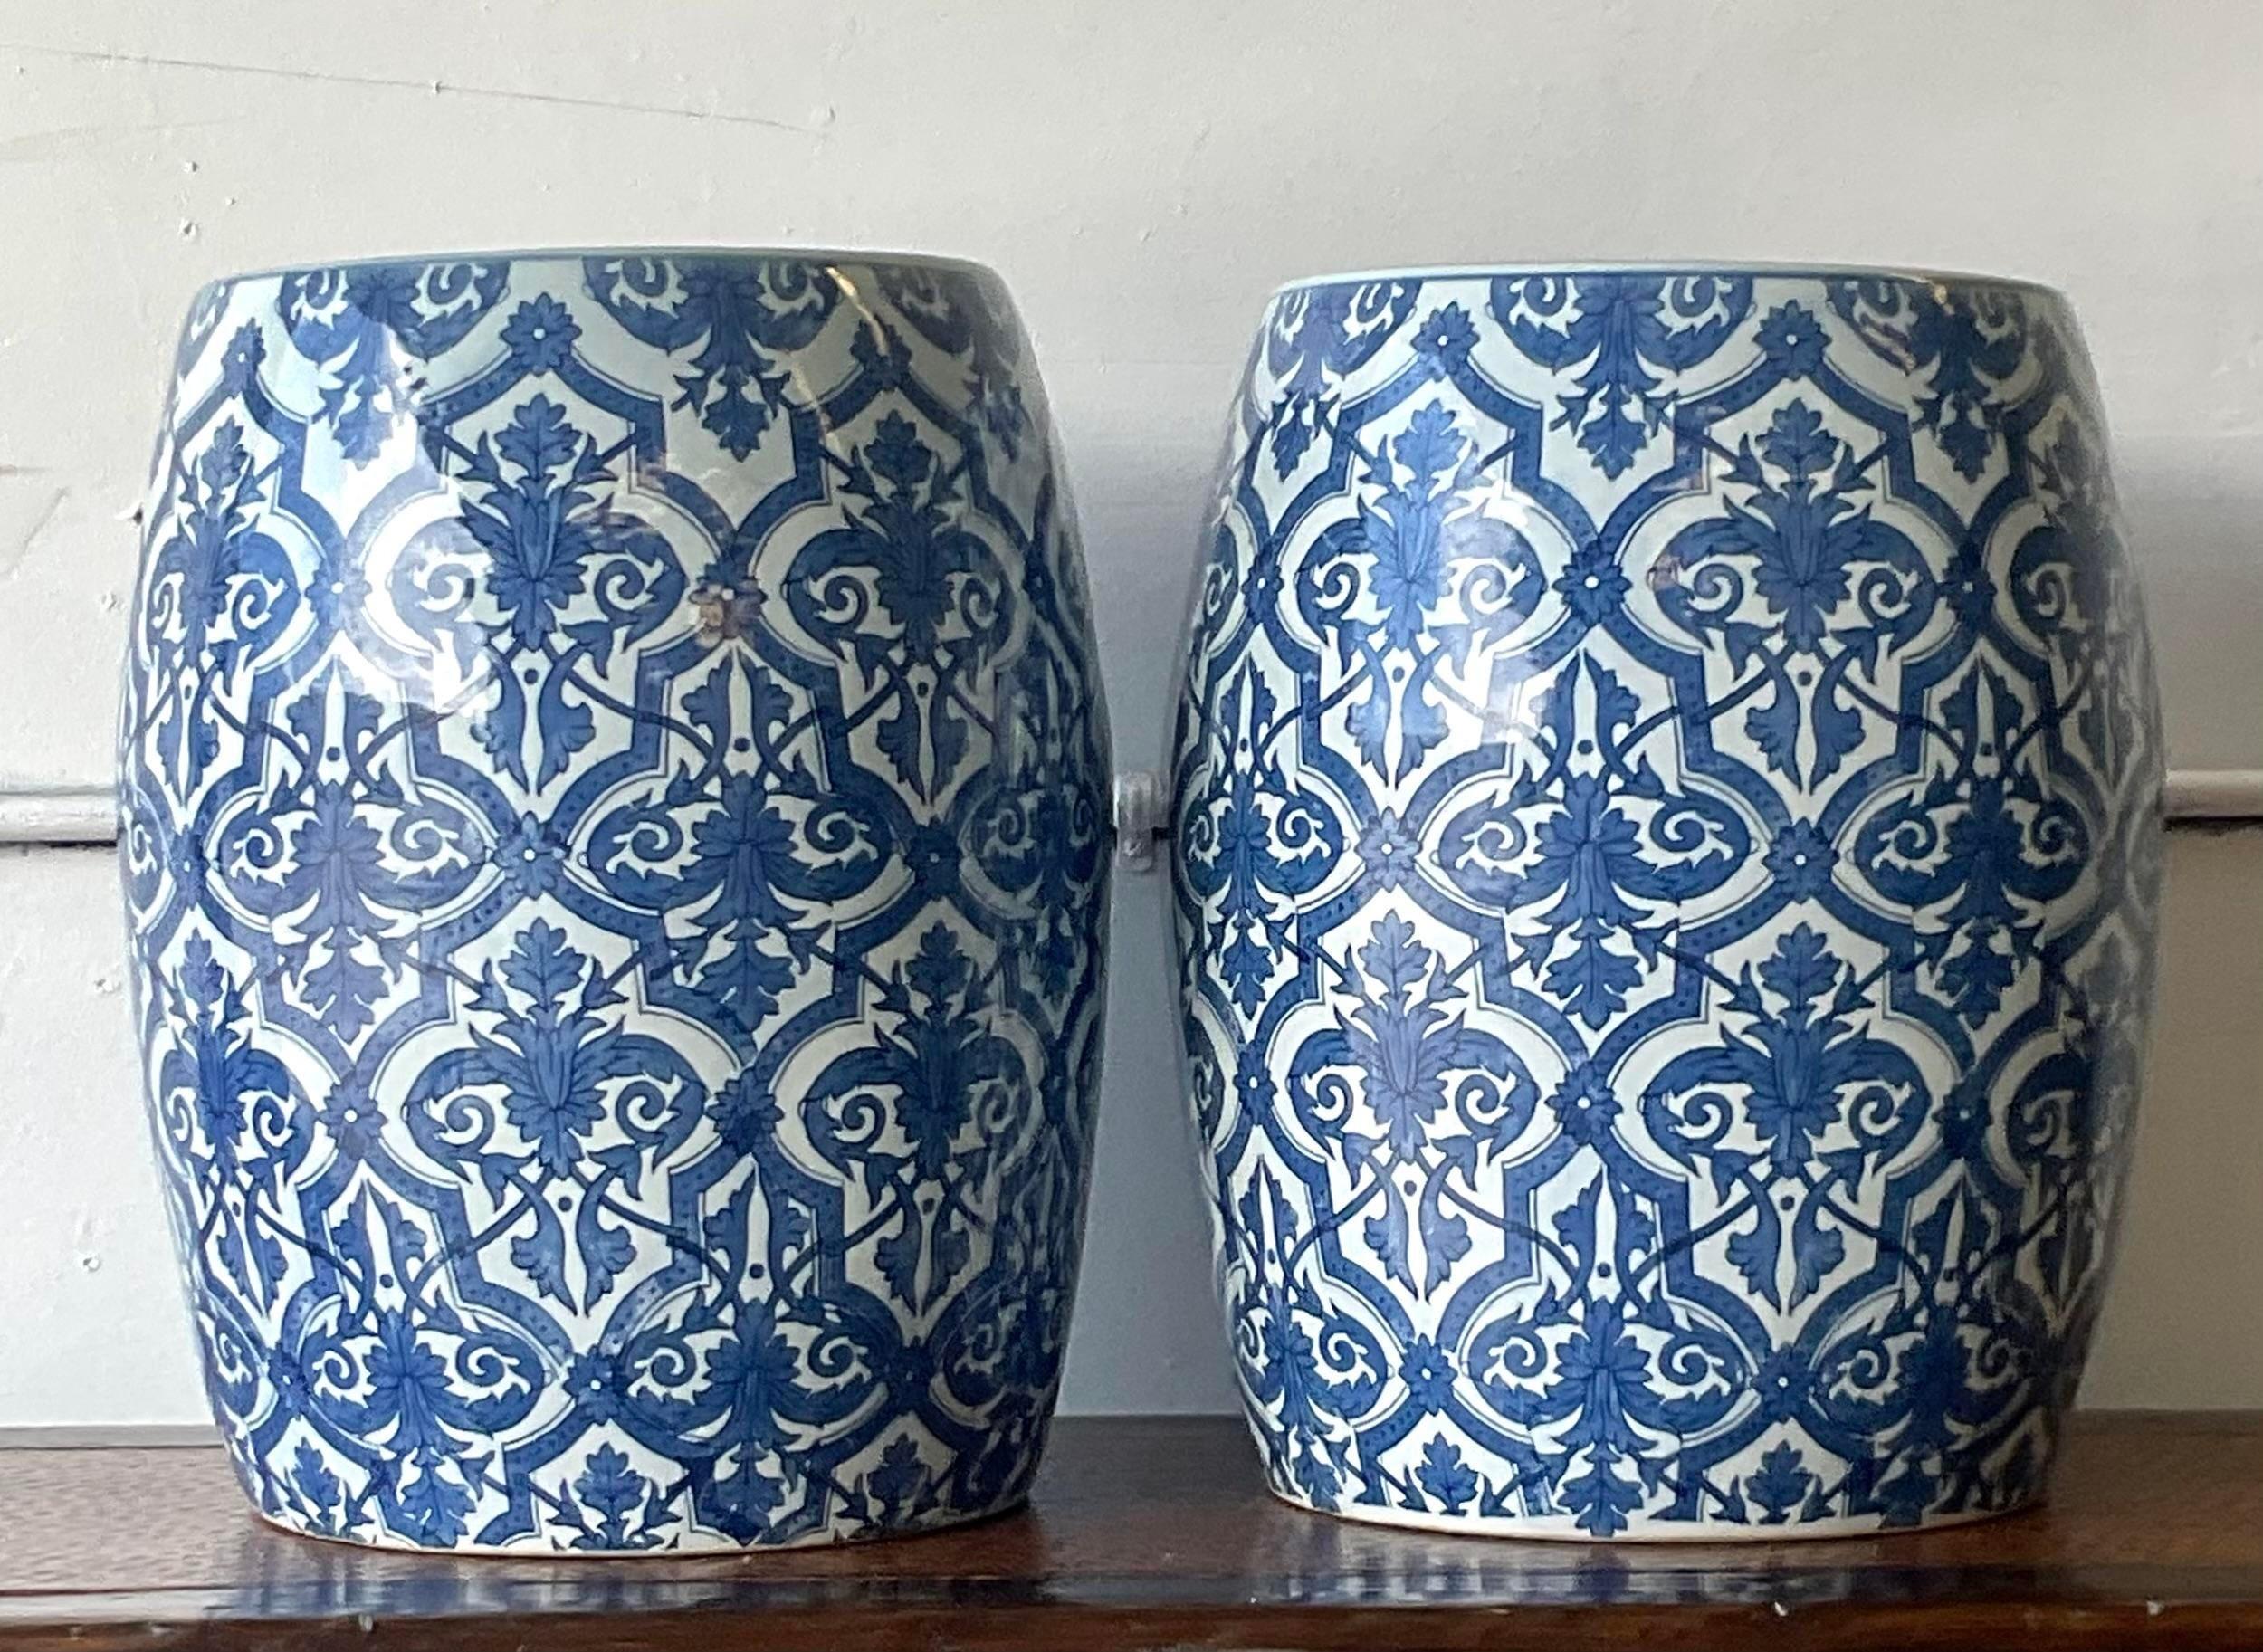 A fabulous pair of vintage Coastal garden stools. A chic blue and white Moroccan design in a matte glaze finish. Acquired from a Palm Beach estate